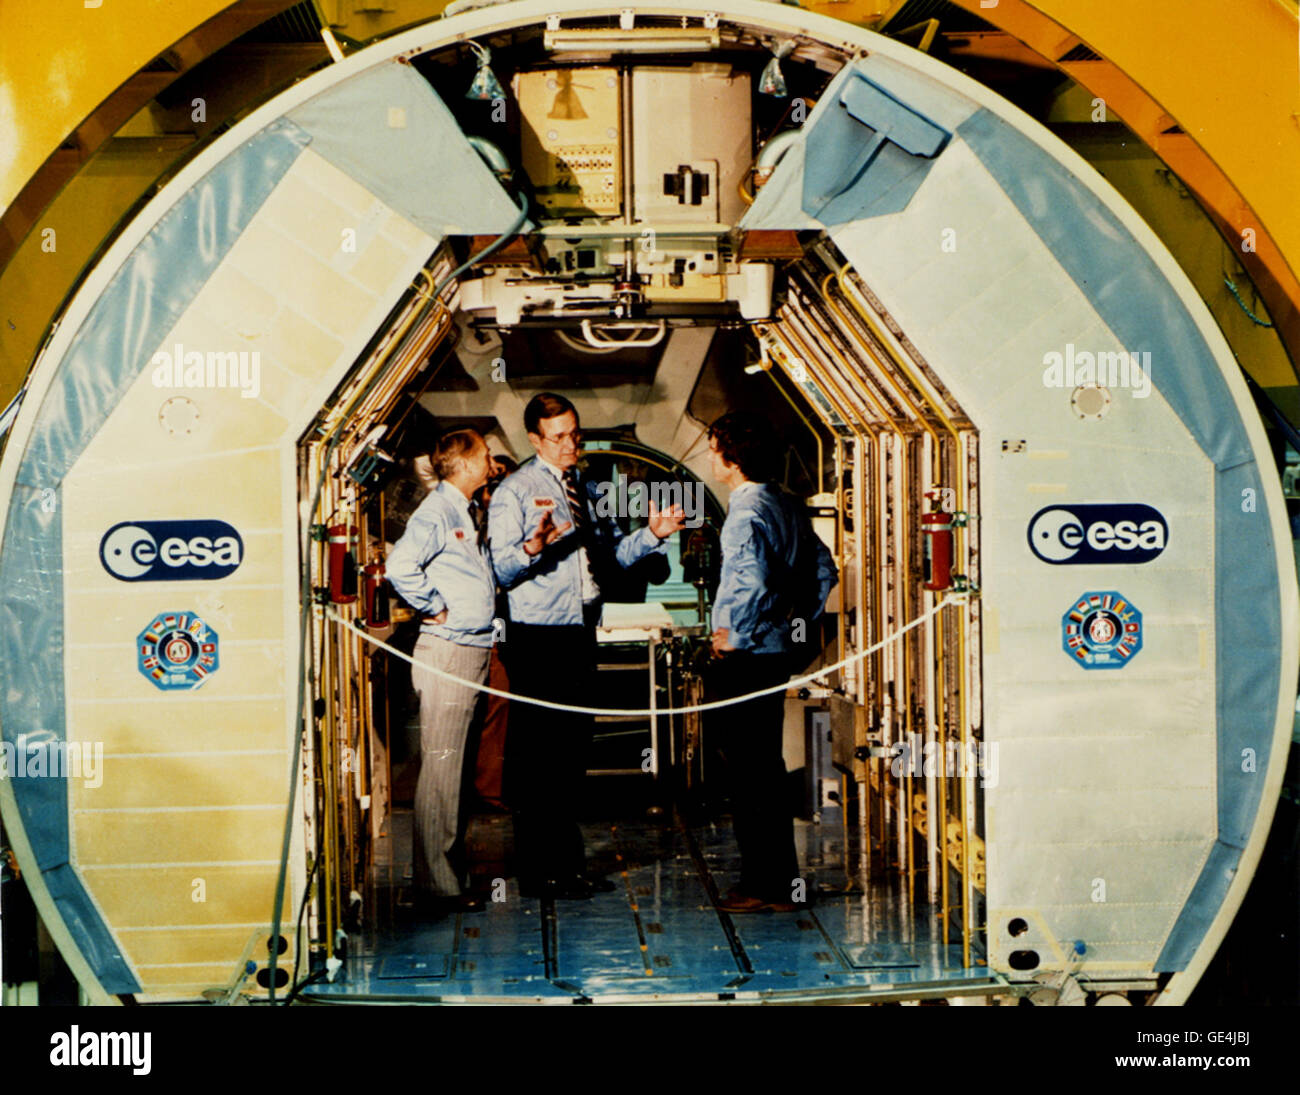 Pictured from the left are astronaut Owen K. Garriott, Vice President George Bush, and Ulf Merbold of West Germany, inside Spacelab in the Operations and Checkout Building at Kennedy Space Center. This European-built orbital laboratory was formally dedicated on February 5, 1982. Merbold was one of the payload specialists on the first Spacelab flight STS-9, that launched November 28, 1983. Spacelab was a reusable laboratory that allowed scientists to perform various experiments in microgravity while orbiting Earth. Designed by the European Space Agency (ESA) and mounted in NASA's Space Shuttle  Stock Photo